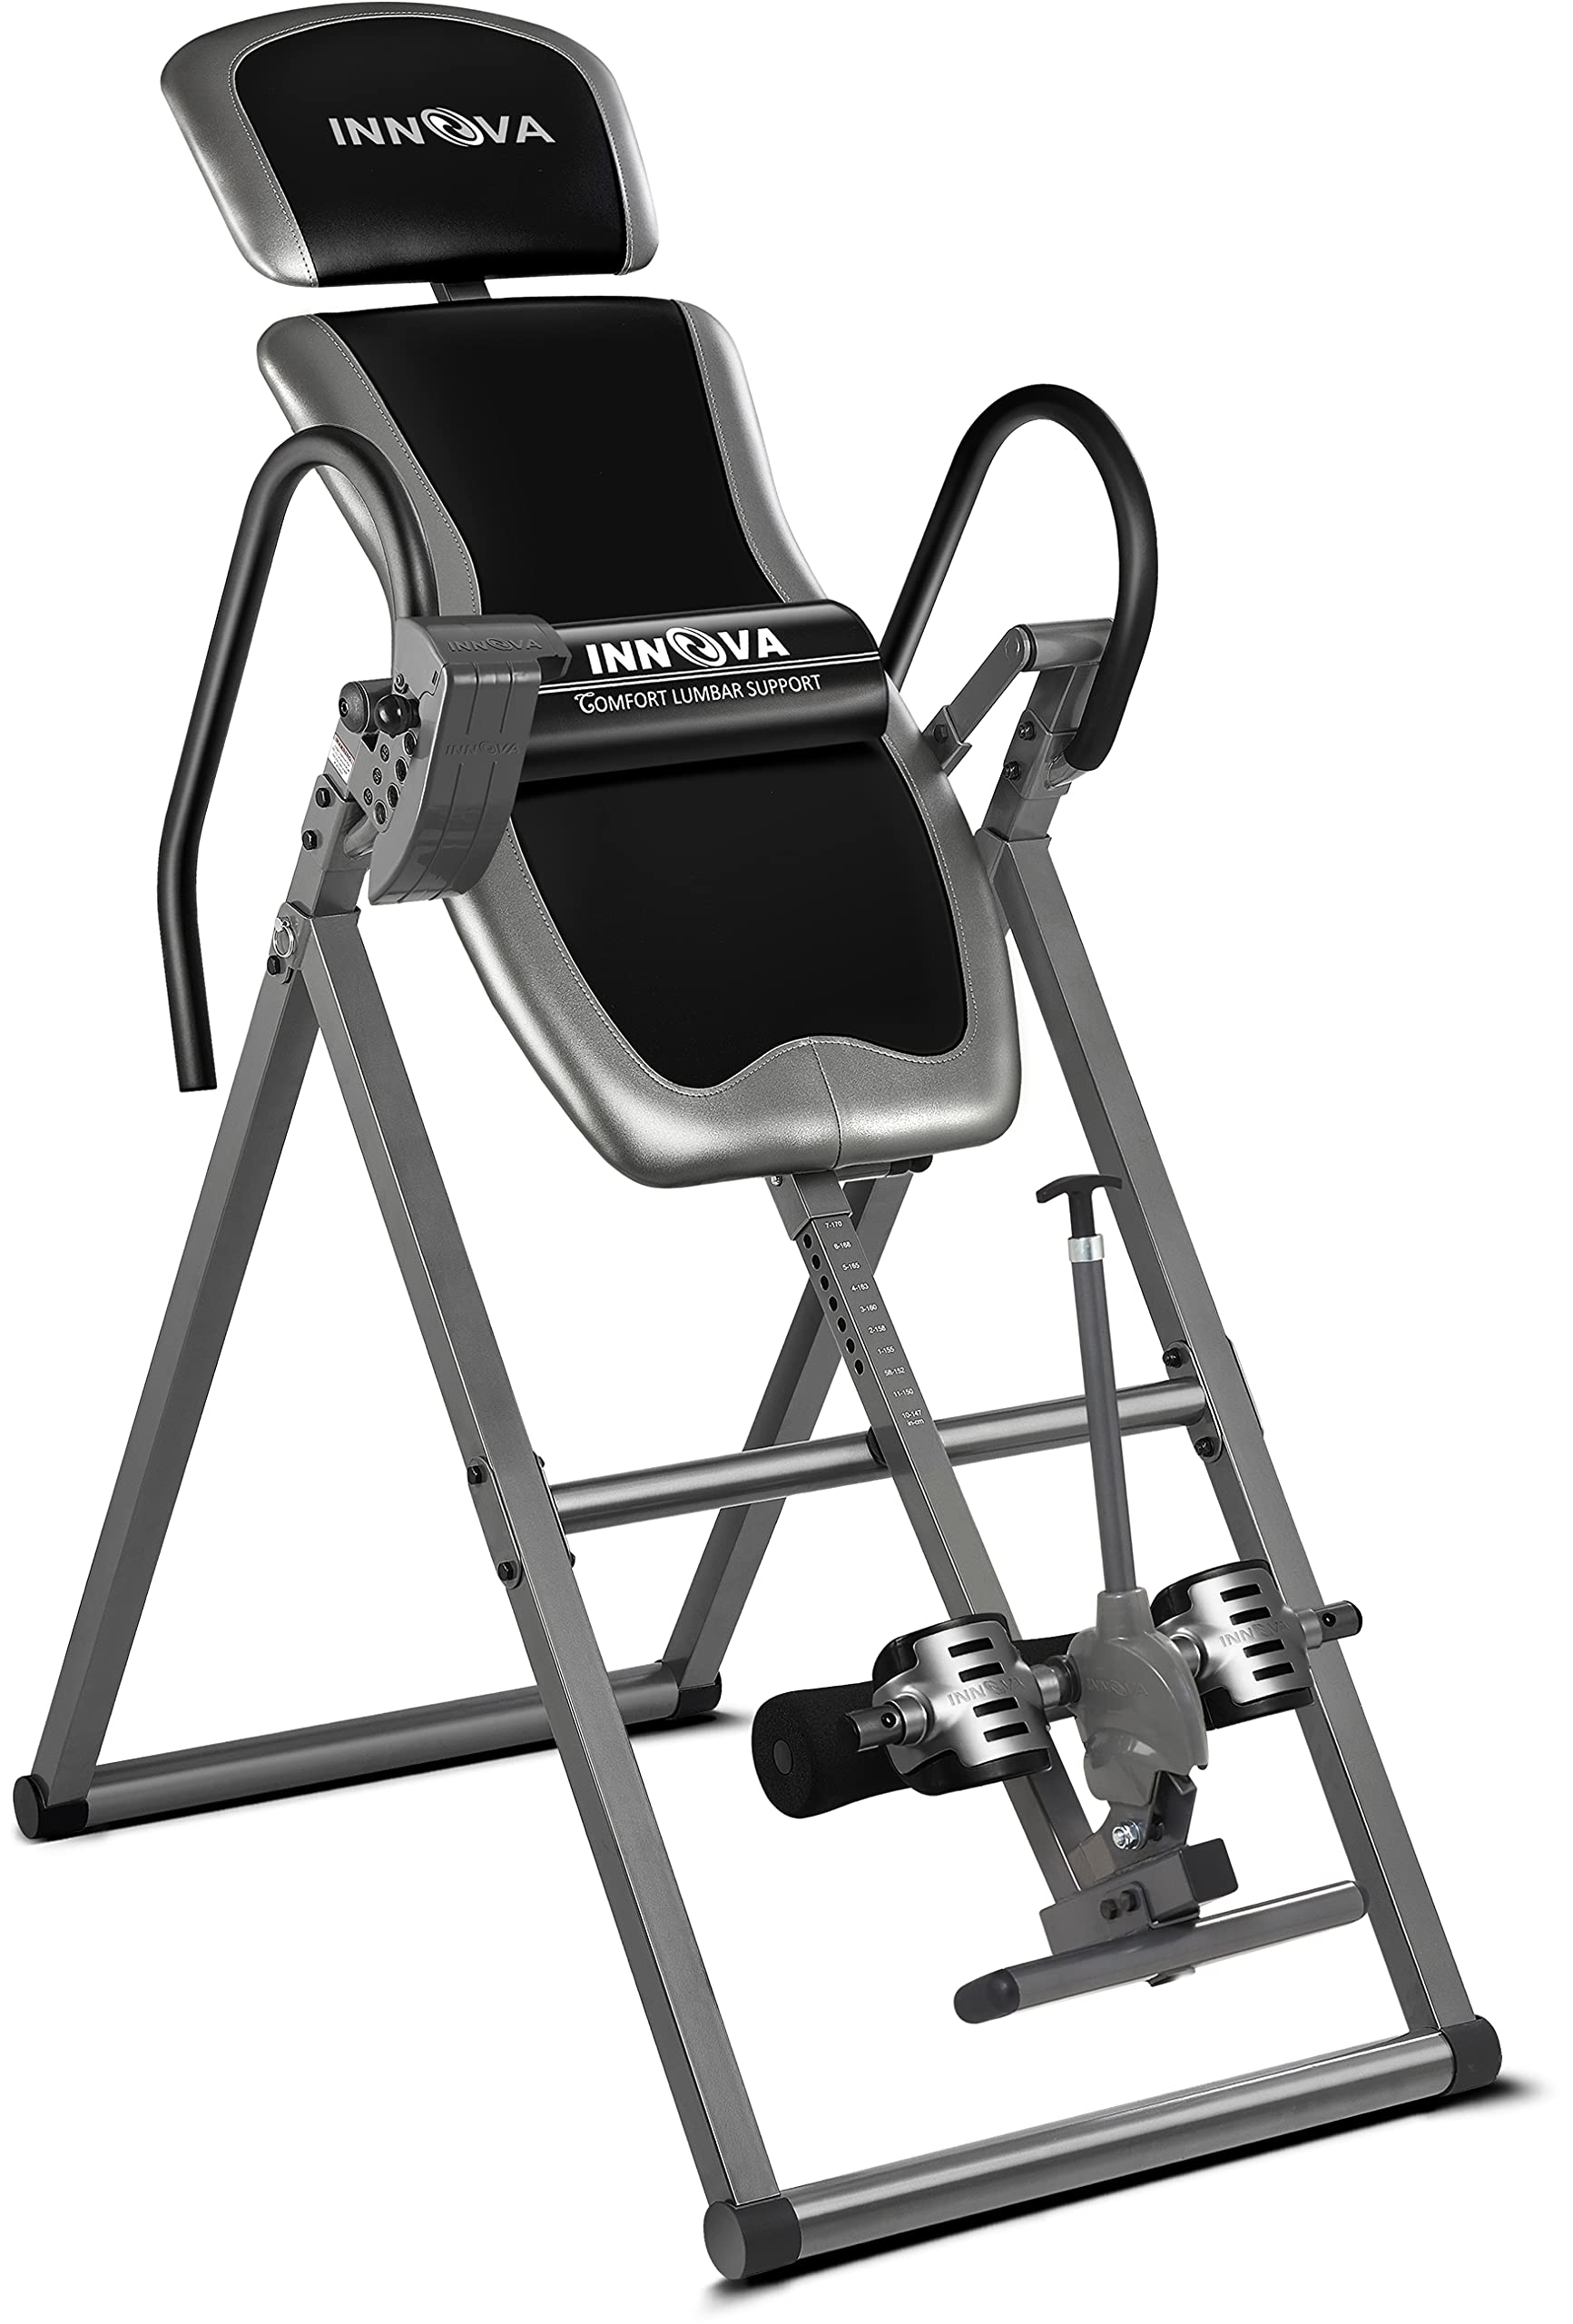 Innova Health and Fitness Innova Inversion Table with A...